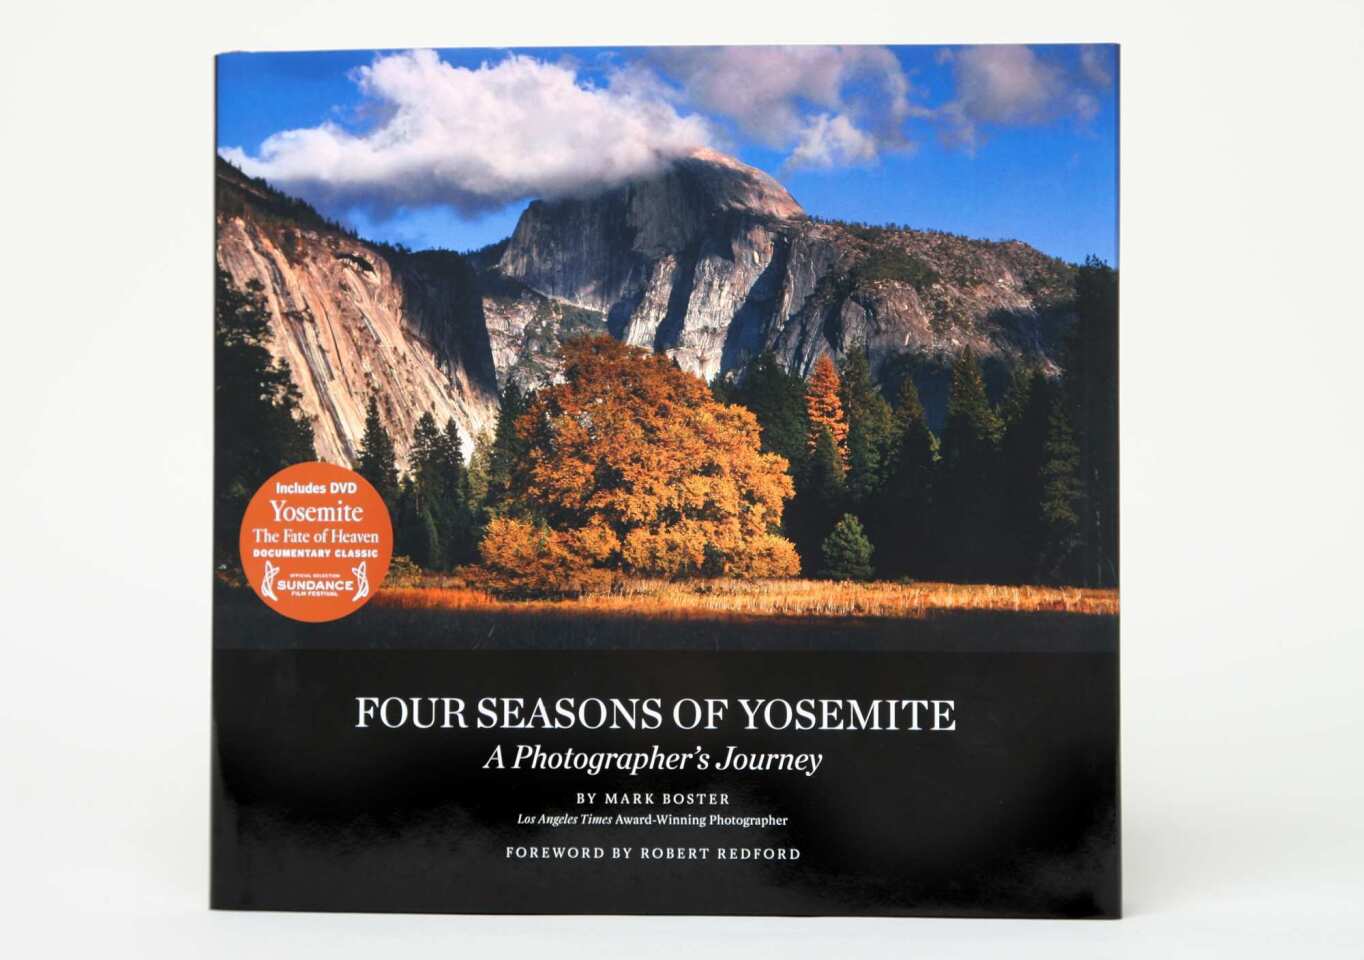 The reason: If Yosemite had a yearbook, this would be it. This stunning collection of close-ups and panoramas grew out of Los Angeles Times photographer Mark Boster's yearlong assignment on the park. For photographers, serious and otherwise, it's the most vivid lesson imaginable in lighting, composition and patience in waiting for the right moment. But you don't have to love photography to appreciate this book. All you need is love for California's most popular backdrop. With a foreword by Robert Redford. The price: $34.95. The details: www.fourseasonsyosemite.com. -- Chris Erskine